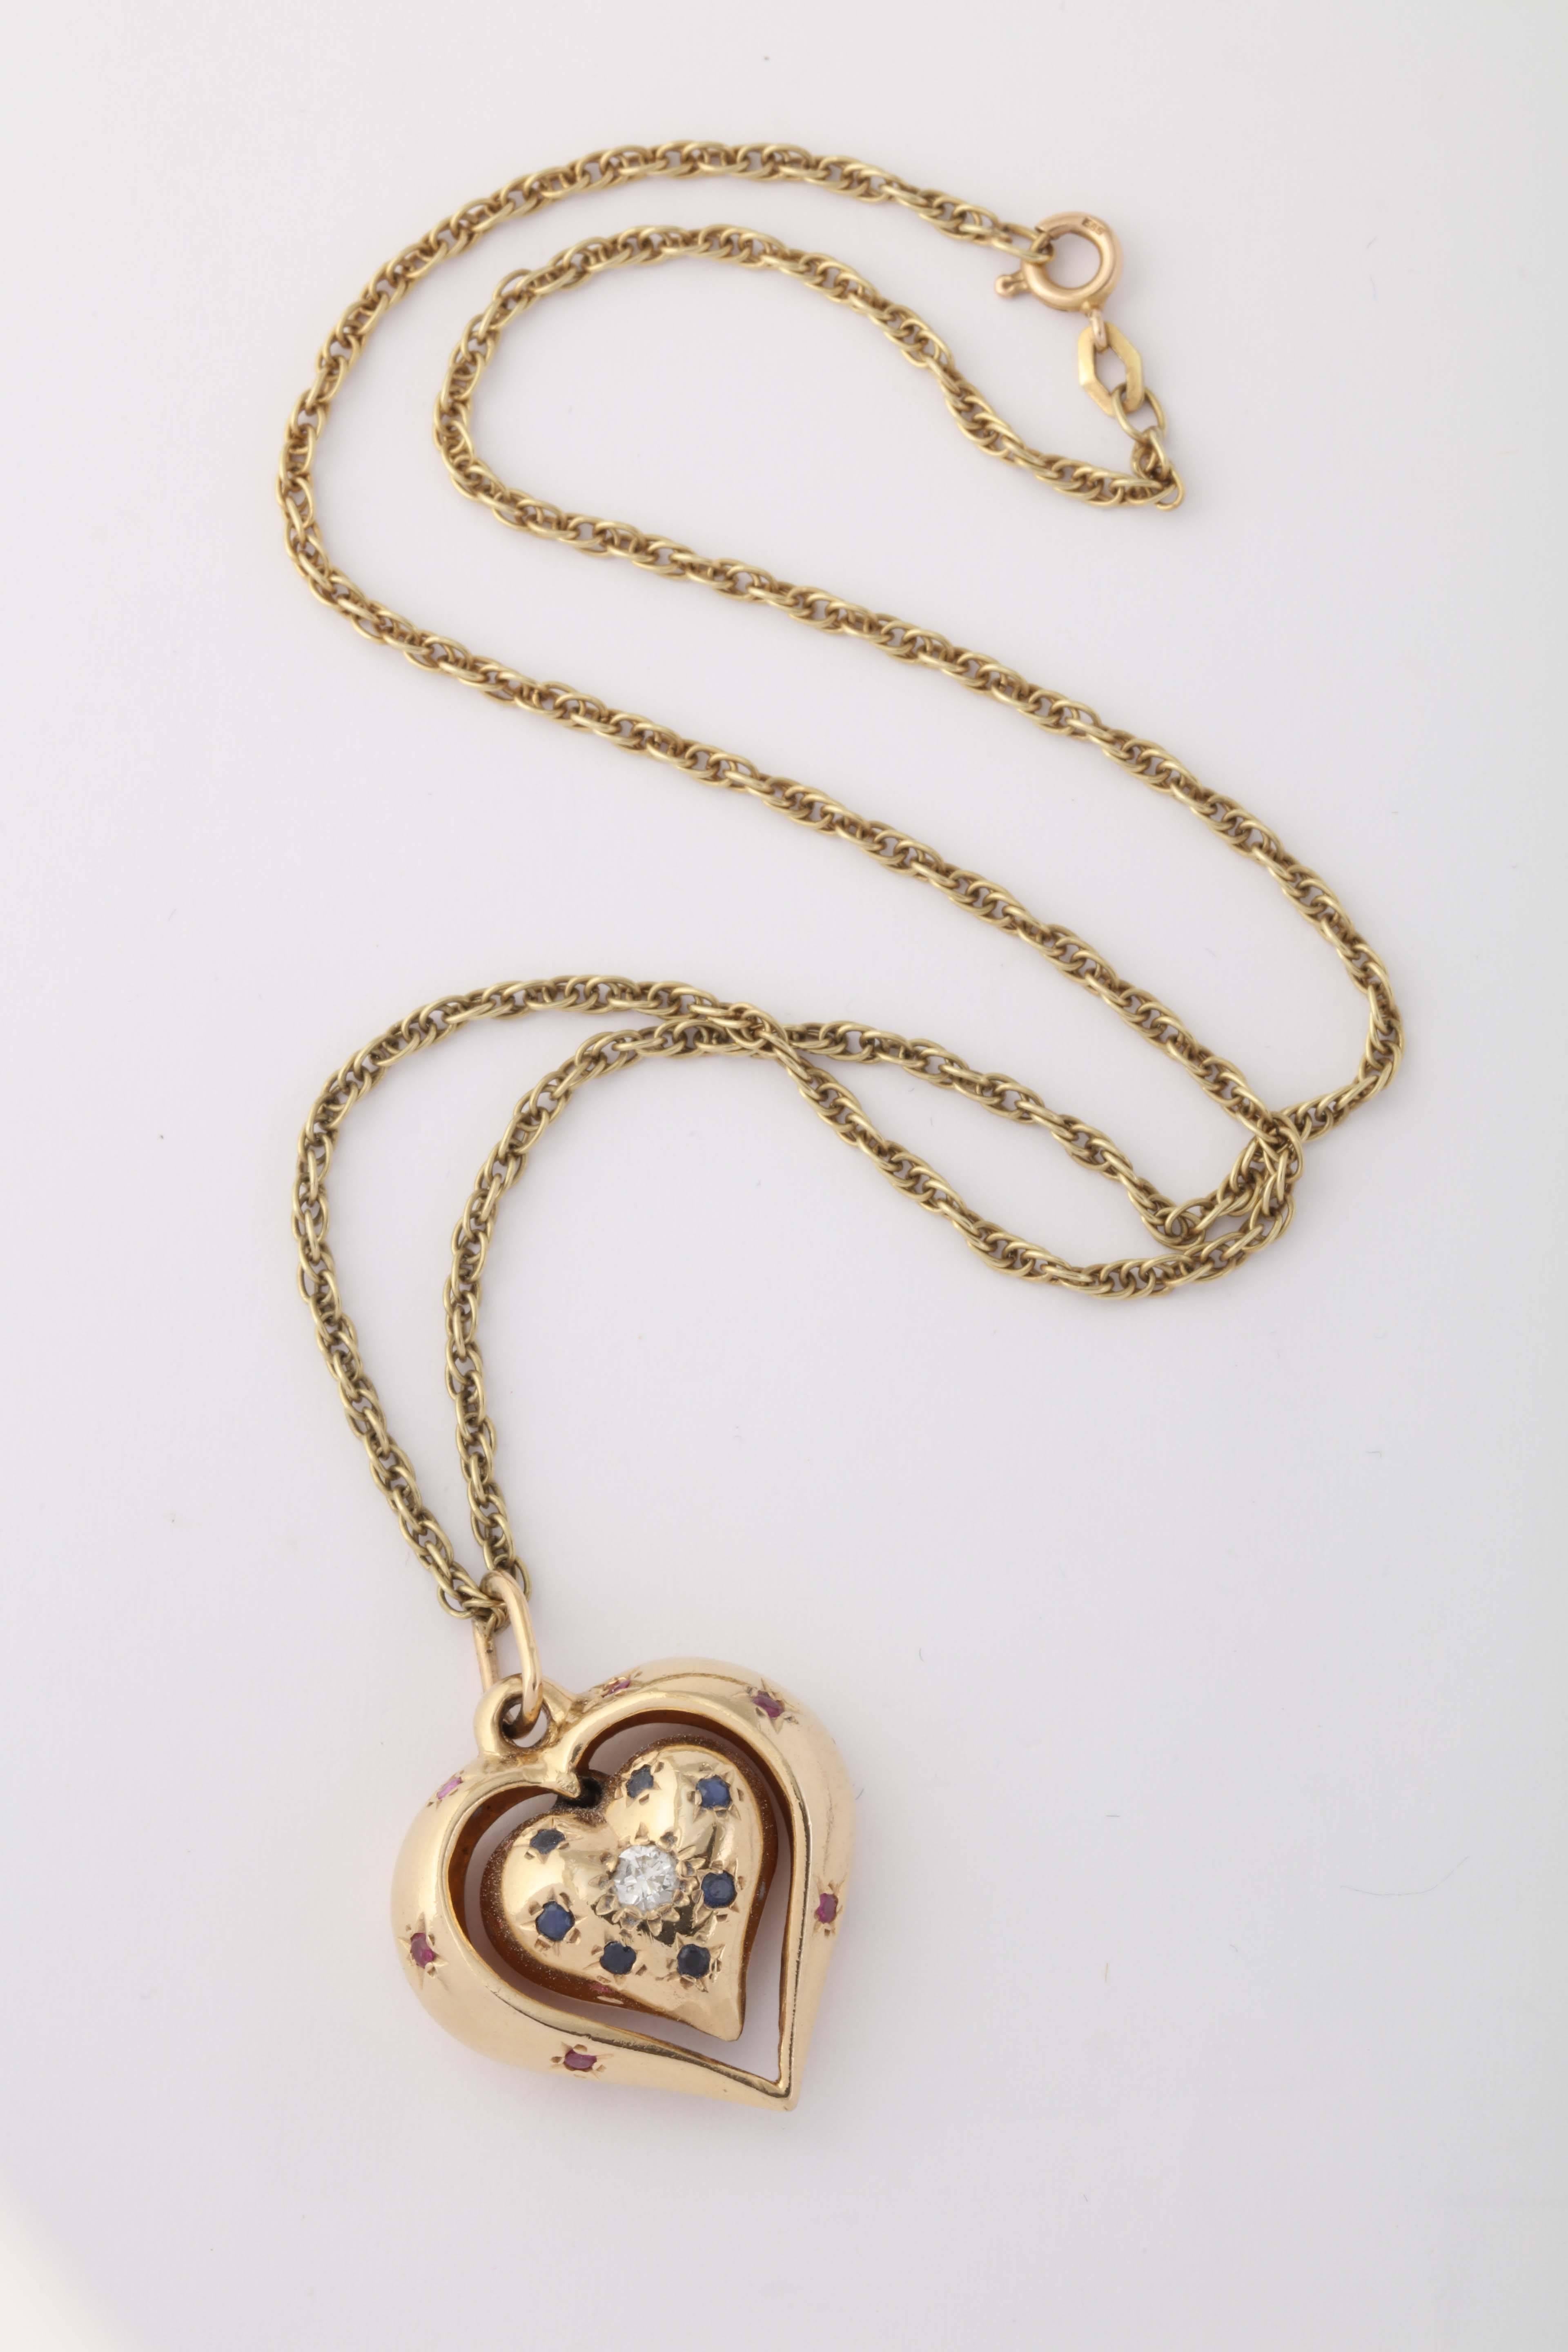 14kt Yellow Gold Reversible Puffy Three Dimensional Heart Pendant Embellished With Sapphires And Rubies And One Large Single Full Cut Diamond Weighing Approximately. 20 pts .All Stones Set In A Star Motif Setting Which Was Typical Of The Settings In